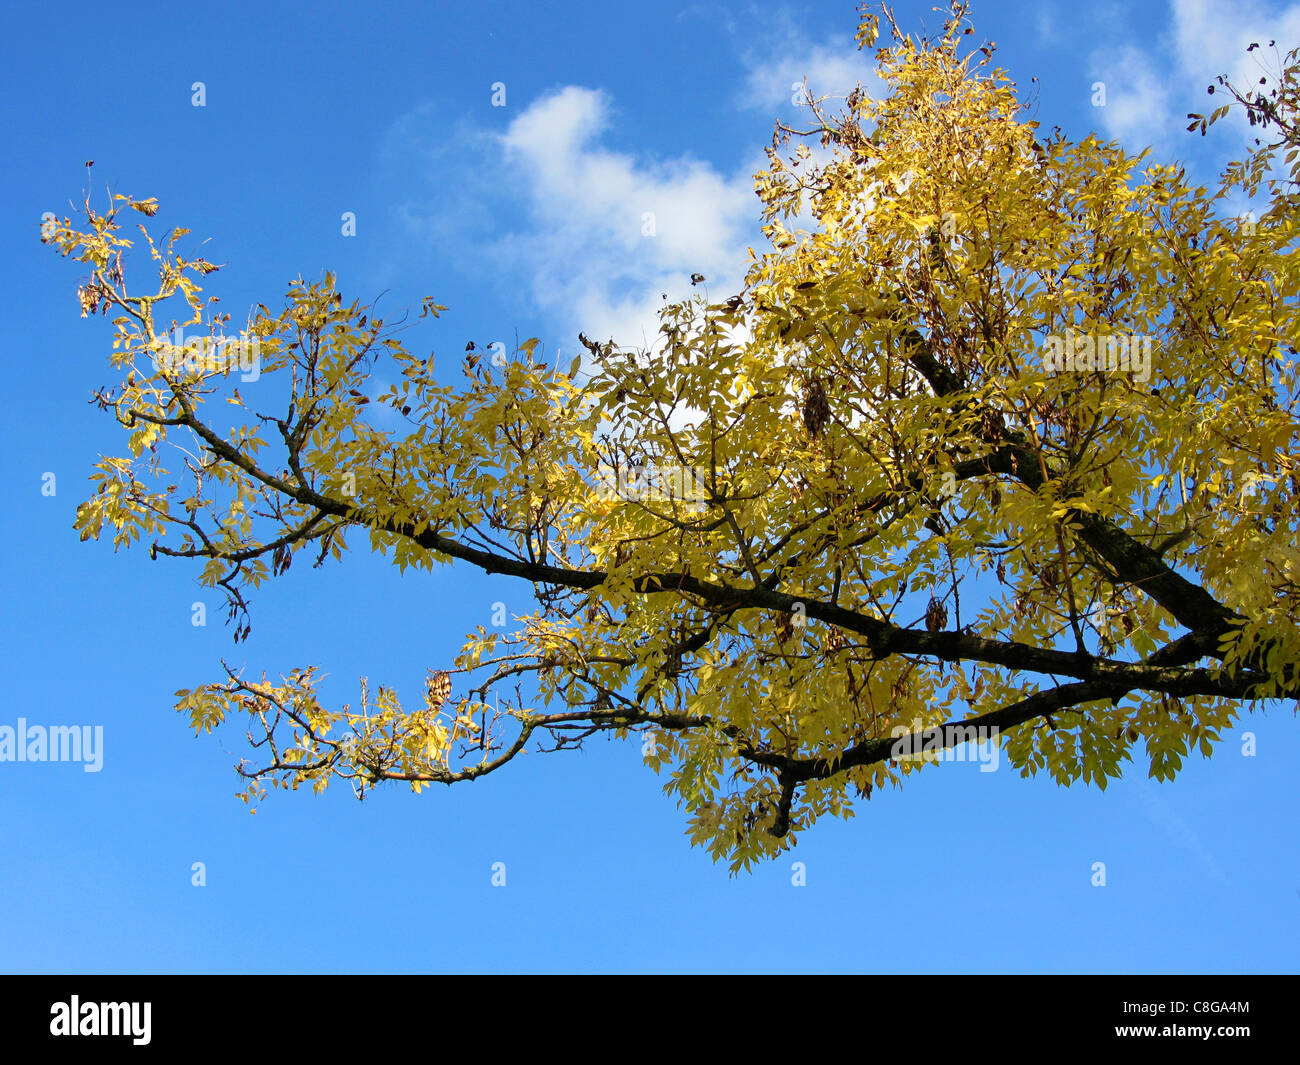 Yellow autumn leaves of an Ash Tree (Fraxinus excelsior) against a blue sky, Alblasserdam, Holland Stock Photo